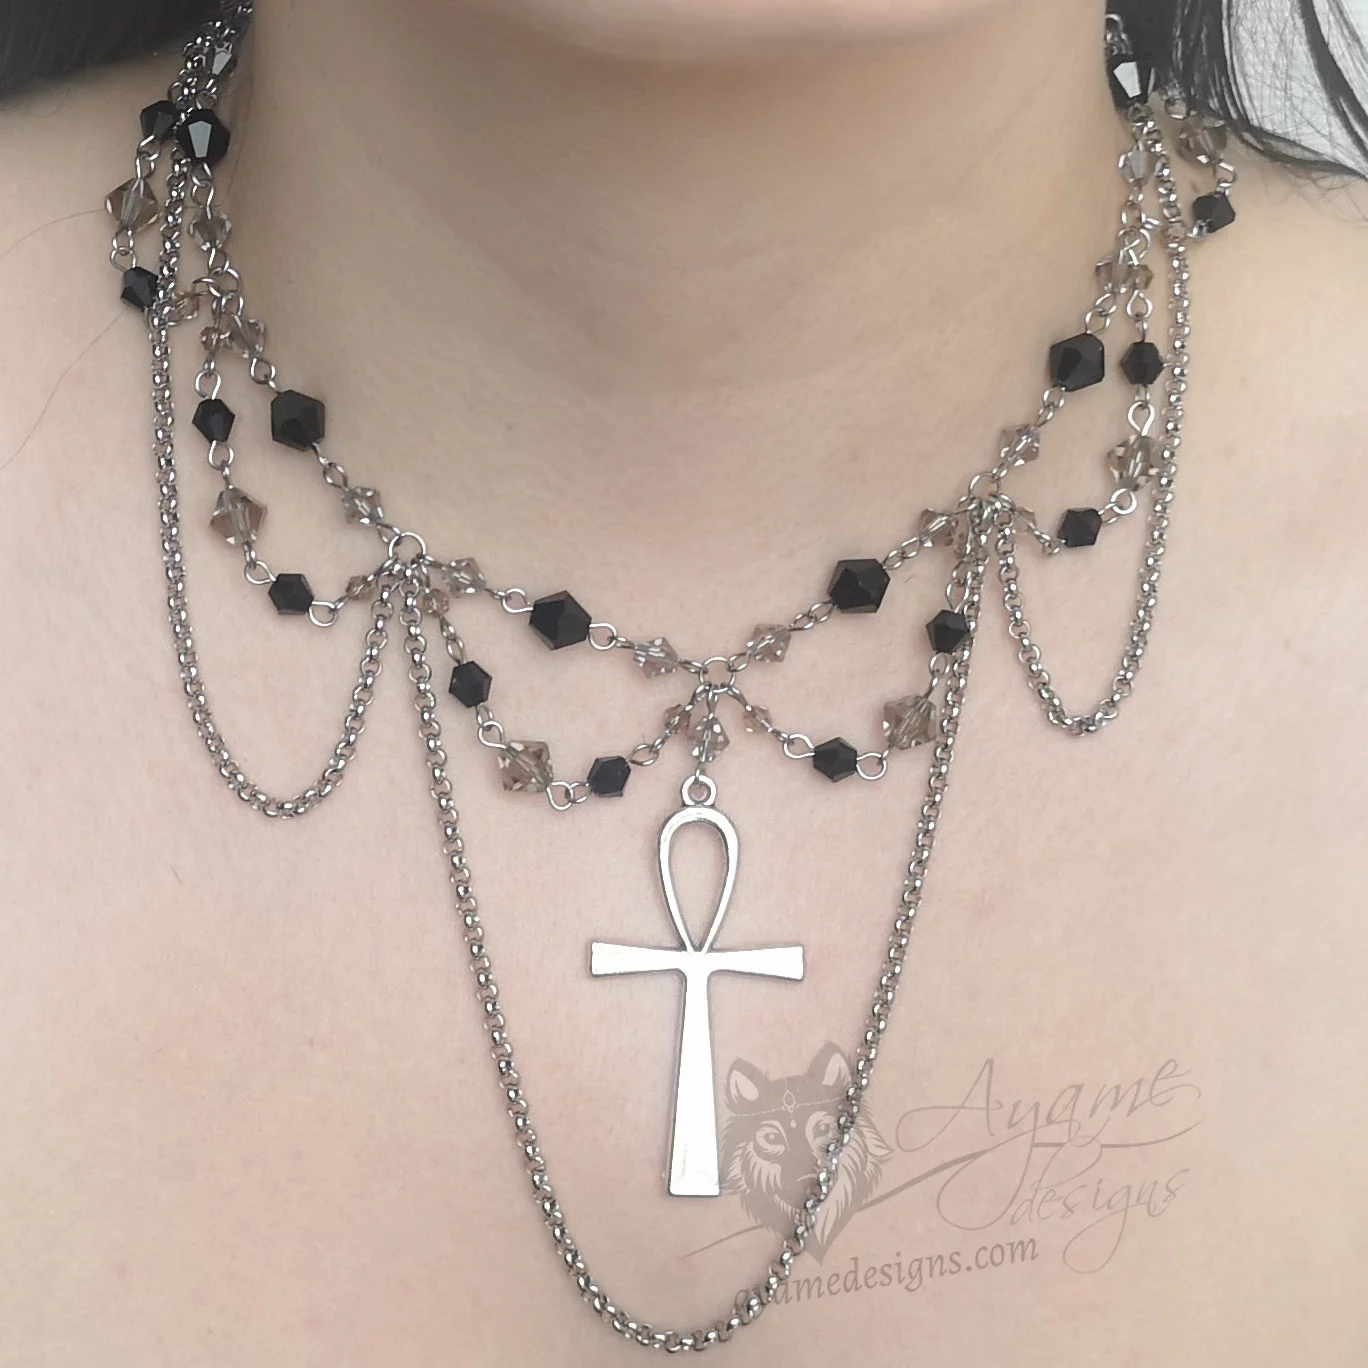 Silver Ankh Cross Pendant Necklace for Men | Classy Men Collection